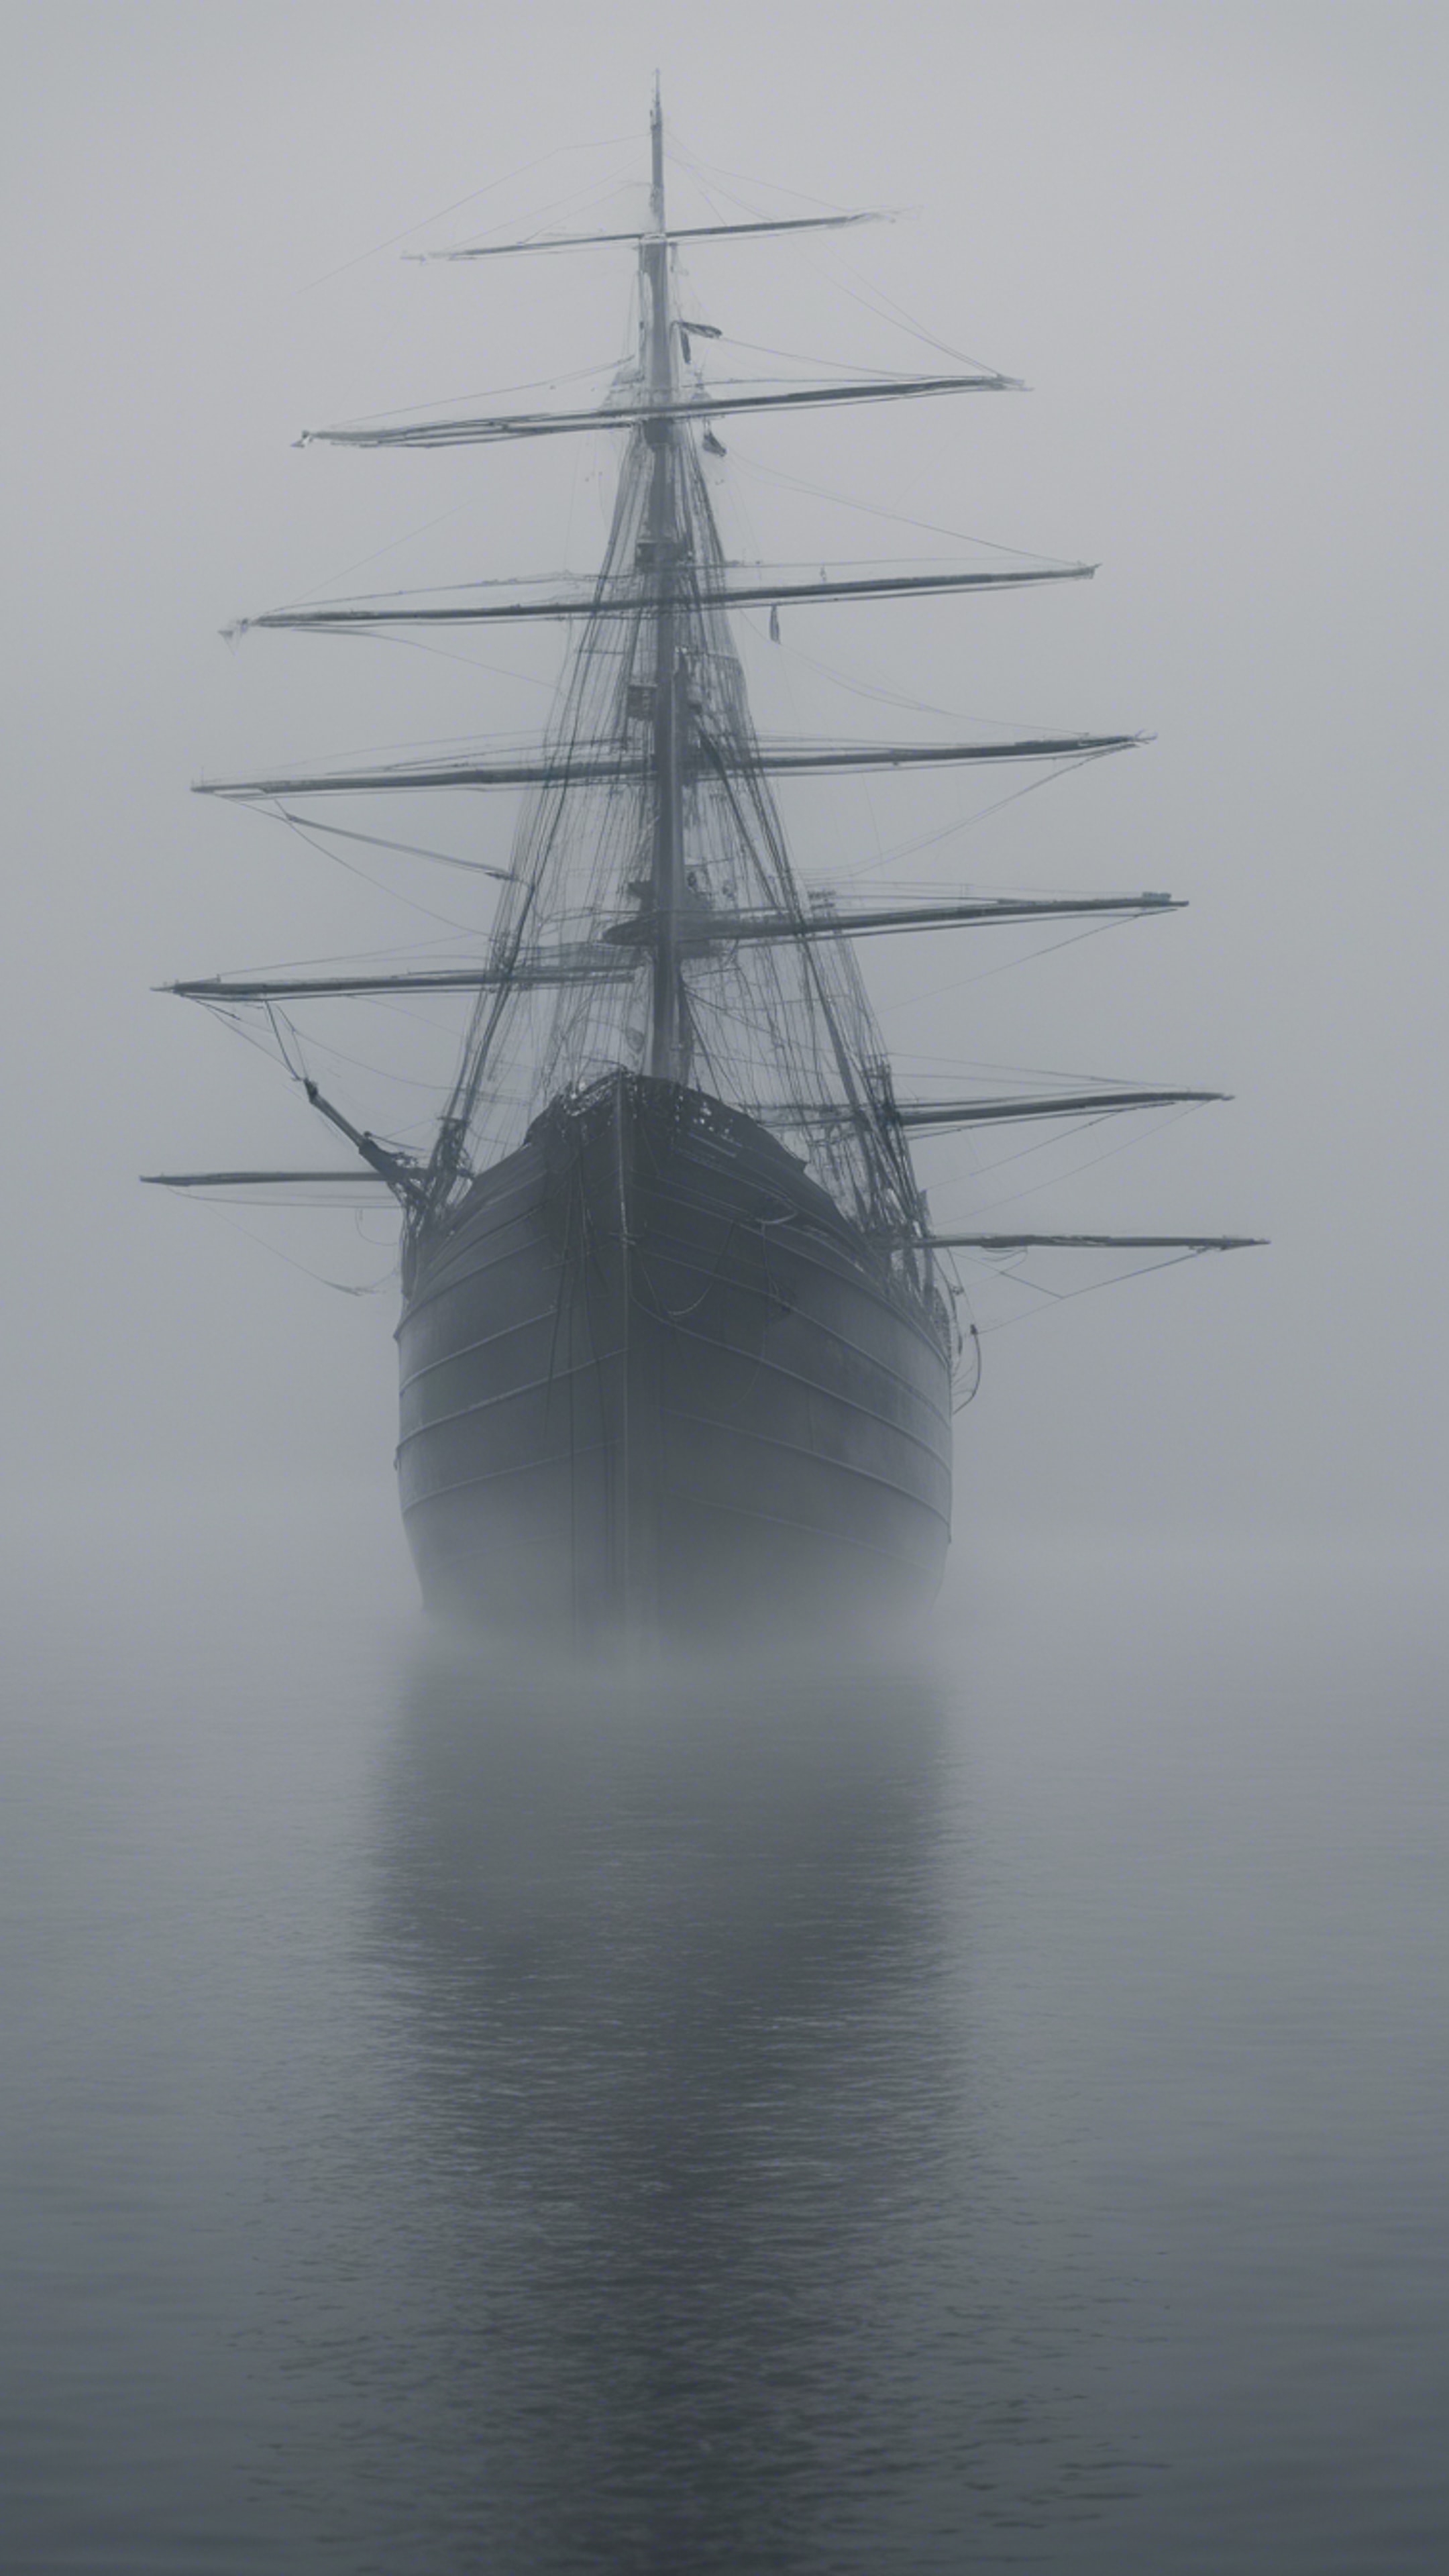 A ghost ship sailing through heavy fog, its masts obscured in drifting grey smoke. 墙纸[277c5cc3bc0e4445b824]